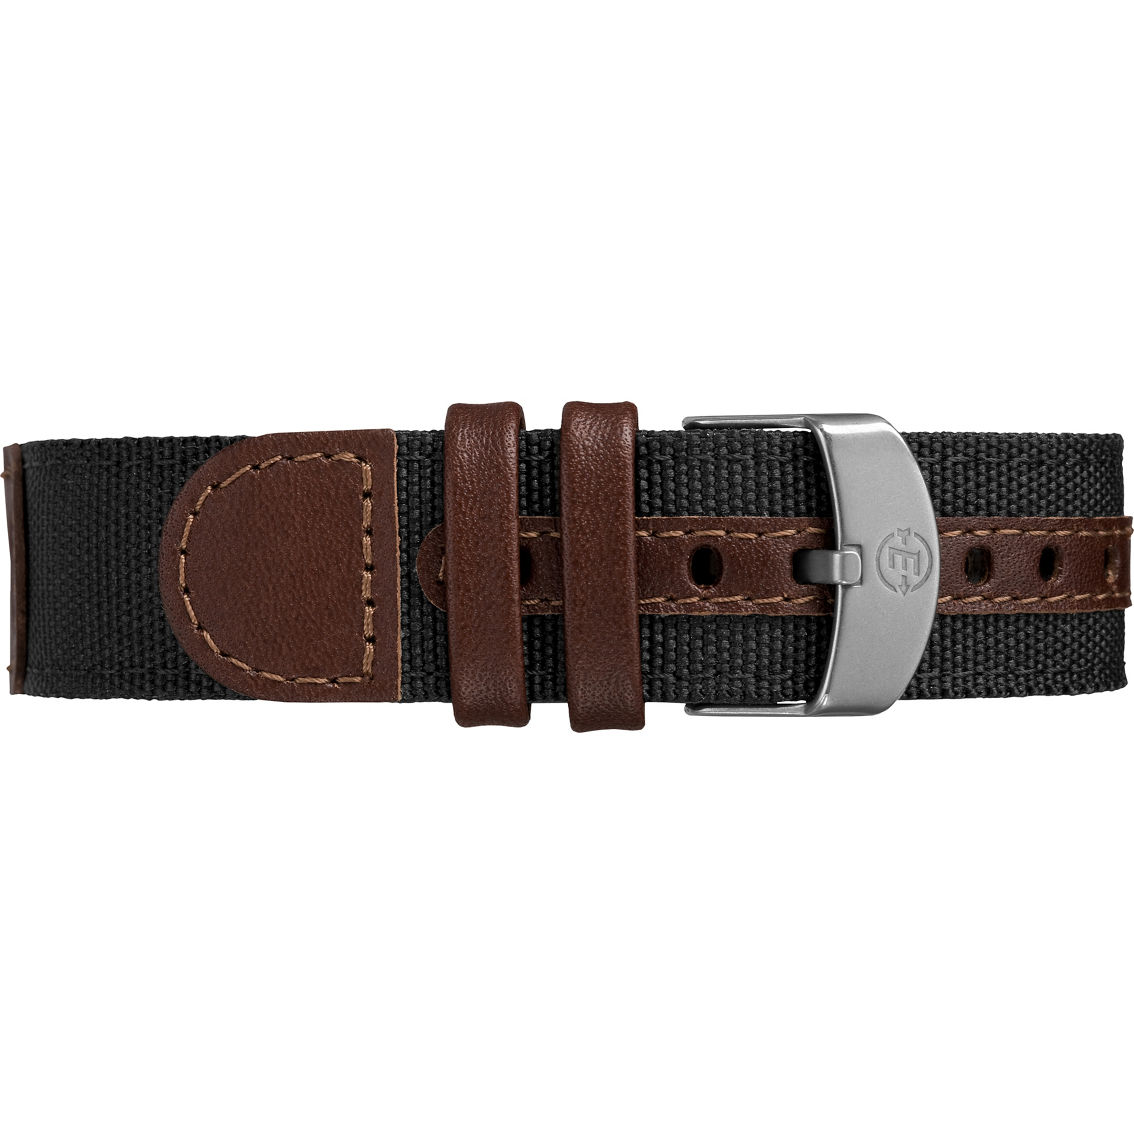 Timex Women's Expedition Fabric/Leather Strap Watch - Image 3 of 3